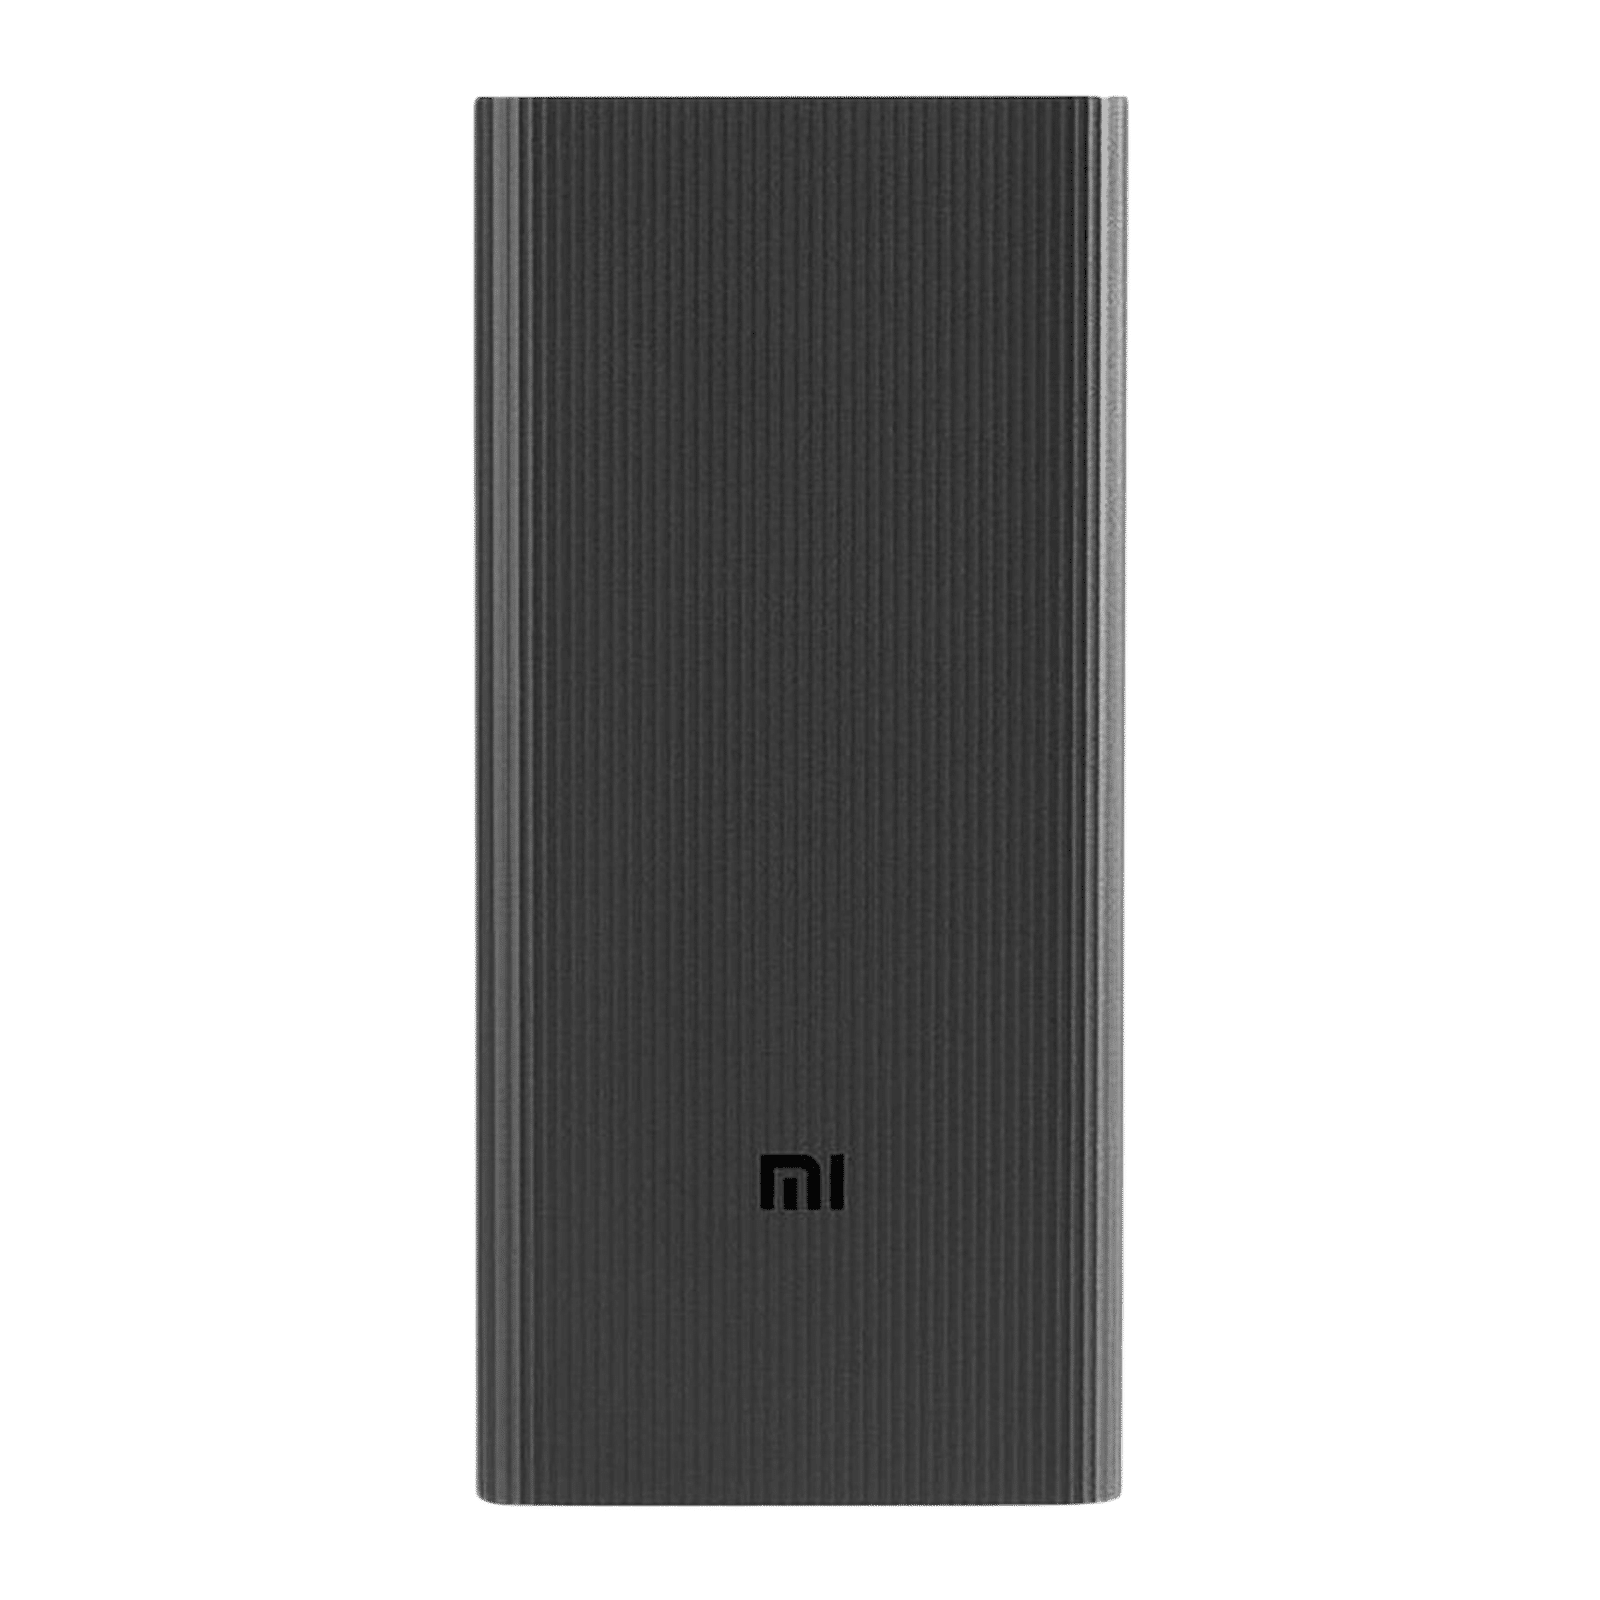 Mi Power Bank 30000 mAh Boost Pro for Rs. 2,299 